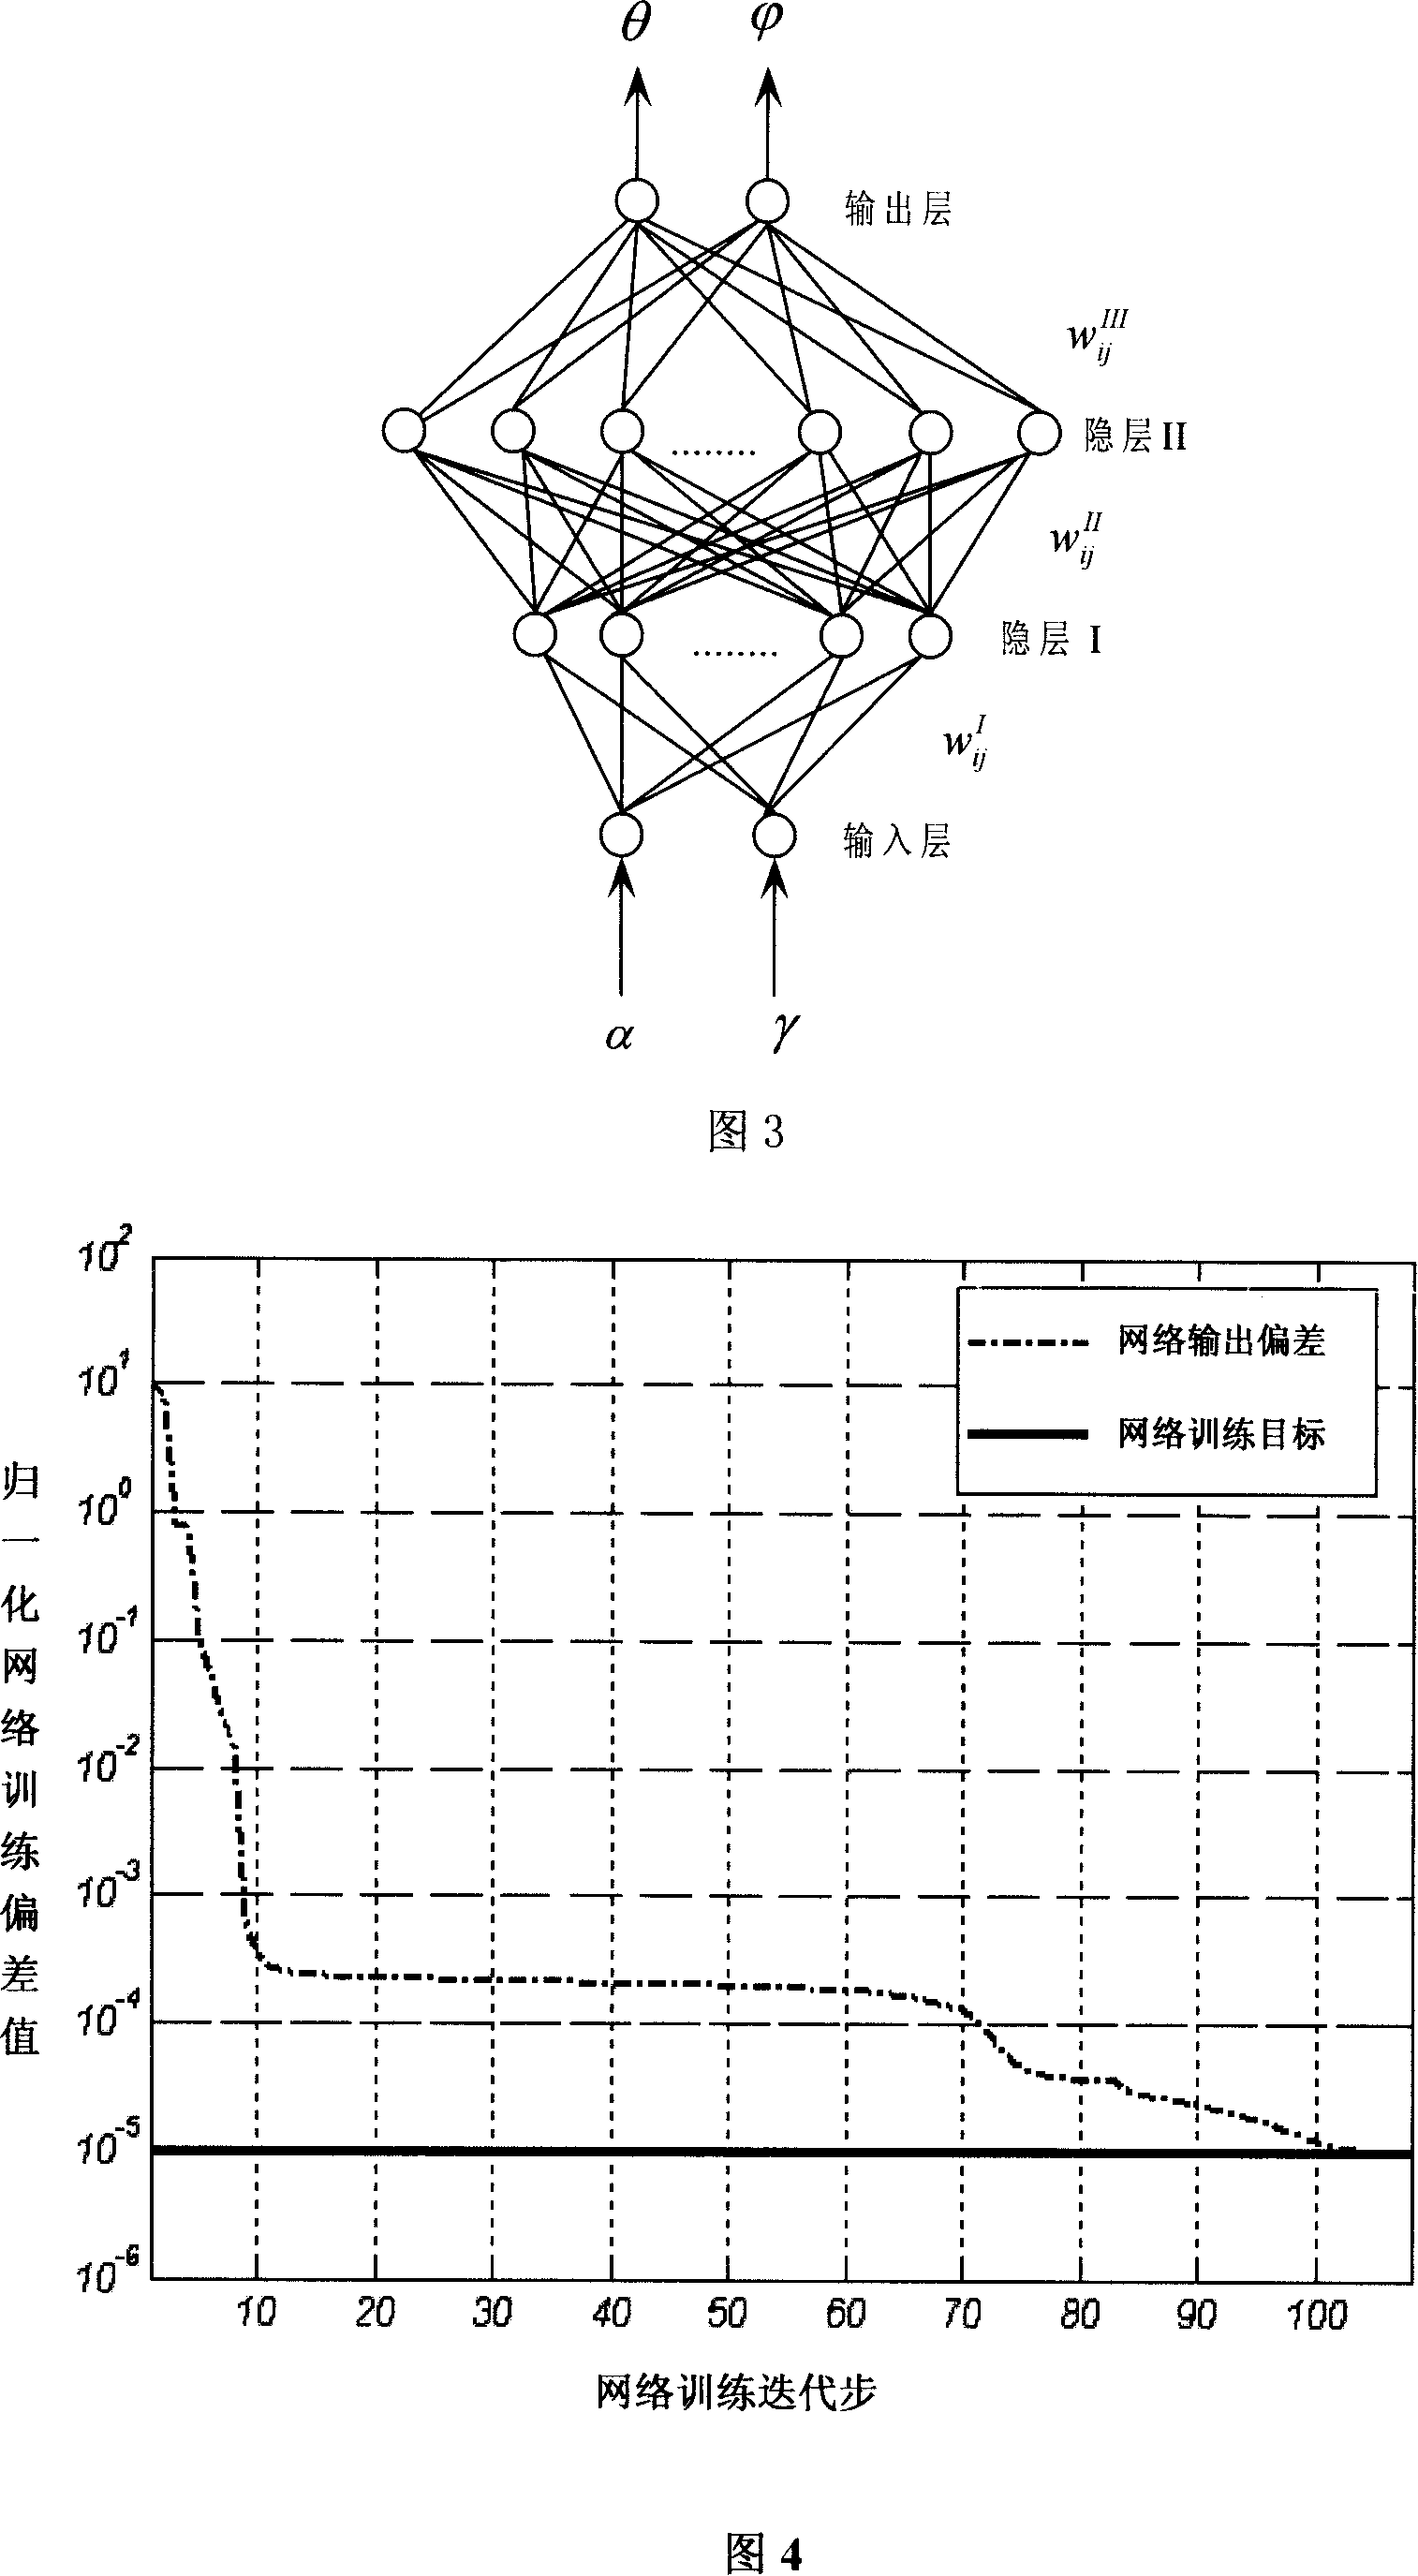 AC spot-welding dynamic electric resistance real-time measuring device and method